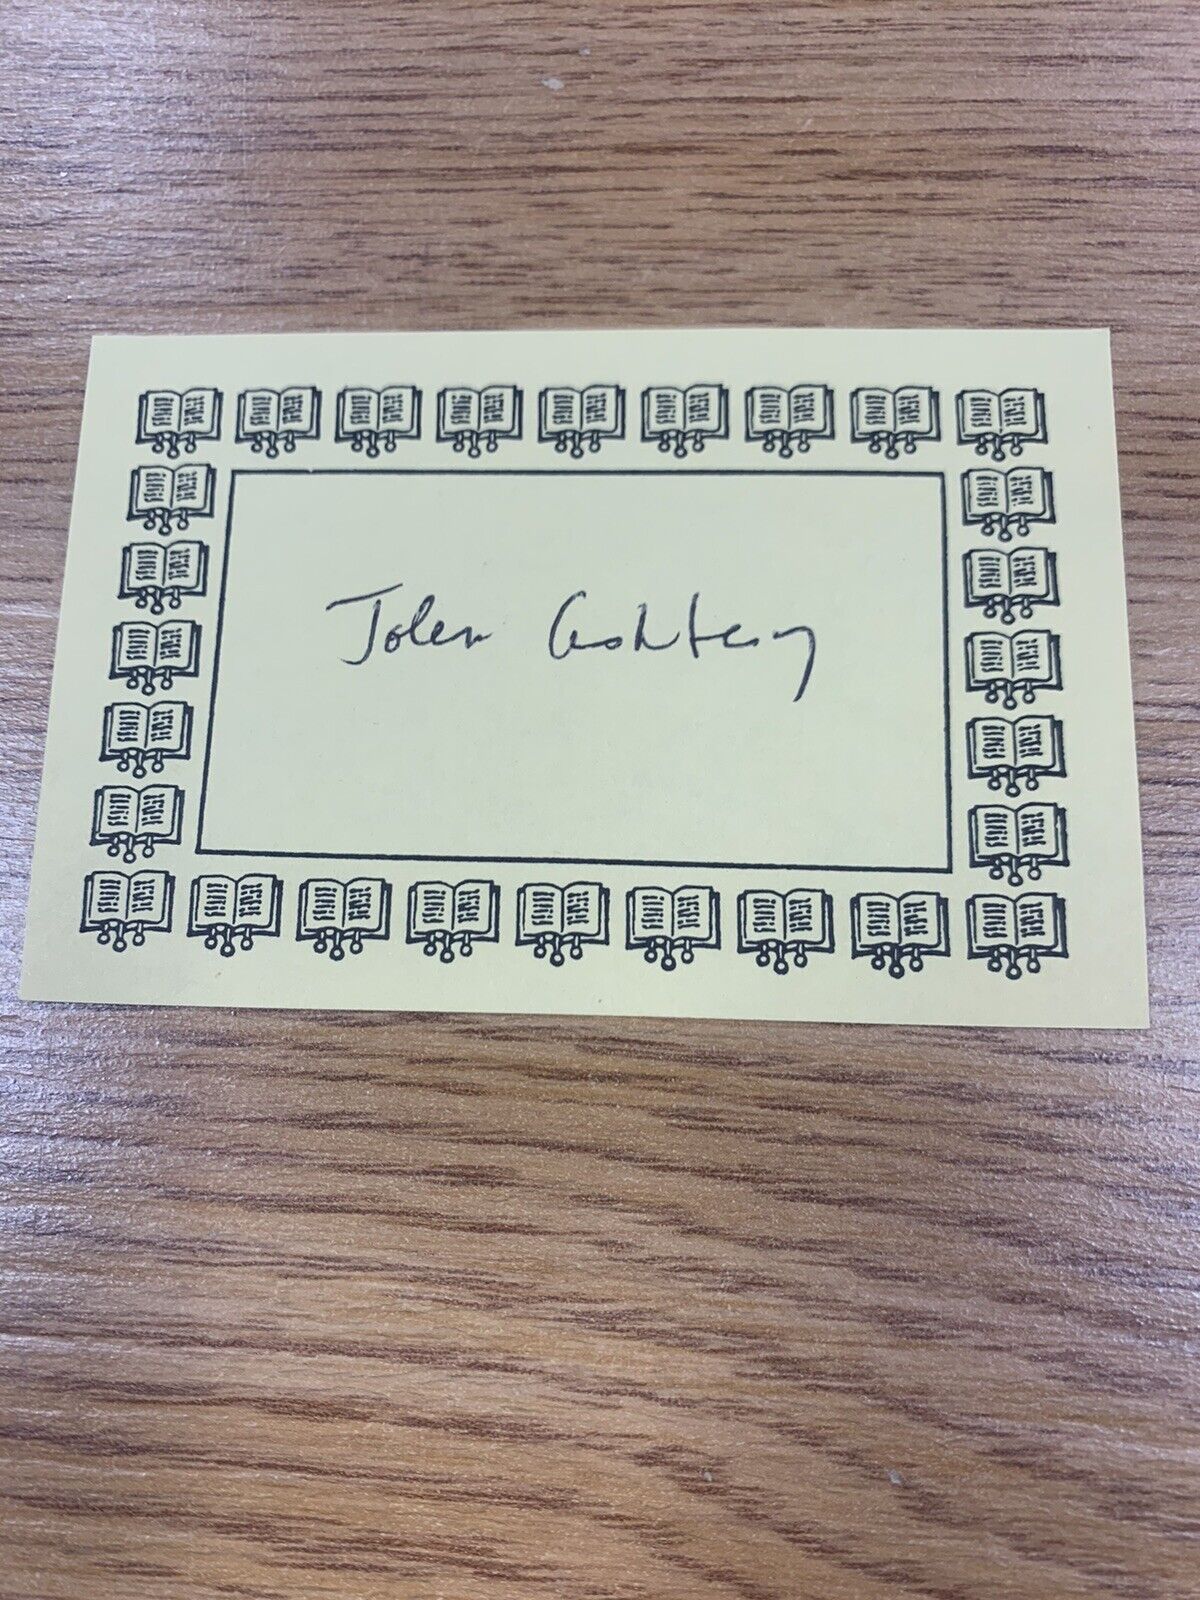 John Ashbery American Poet Art Critic Author Signed Bookplate Autographed